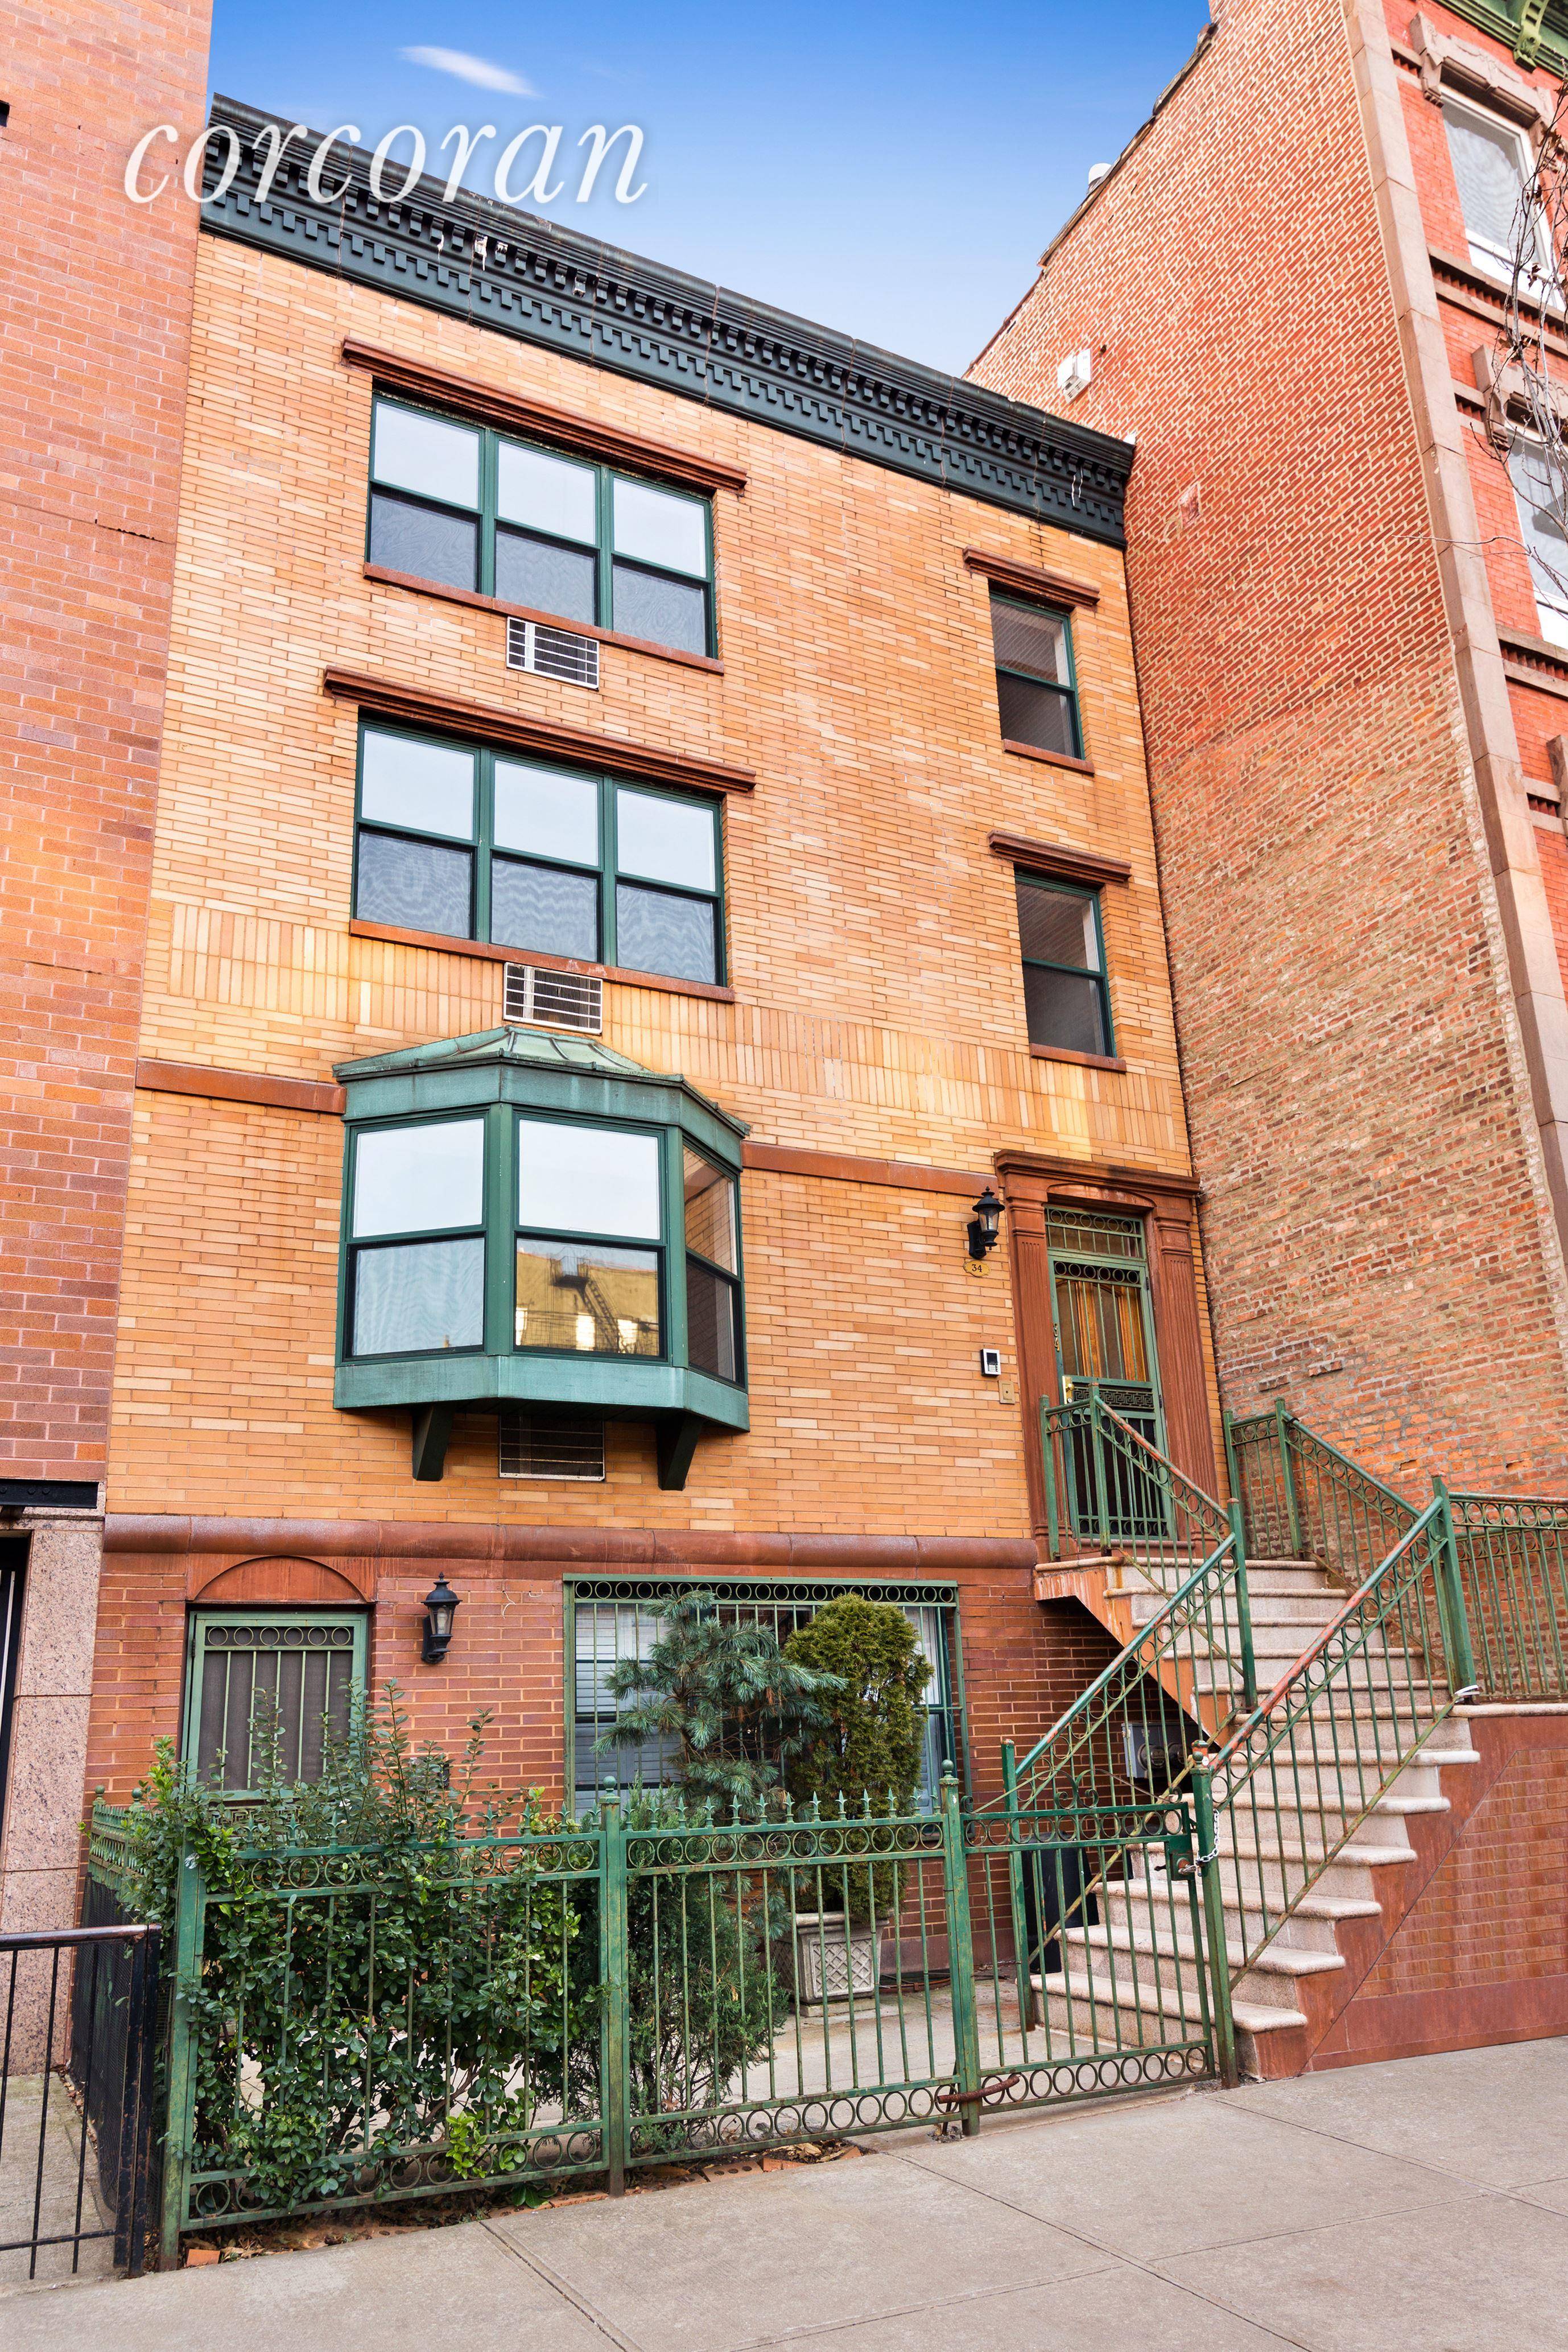 34 West 128th Street is a rare find since it is 25 feet wide on a 100 foot lot.